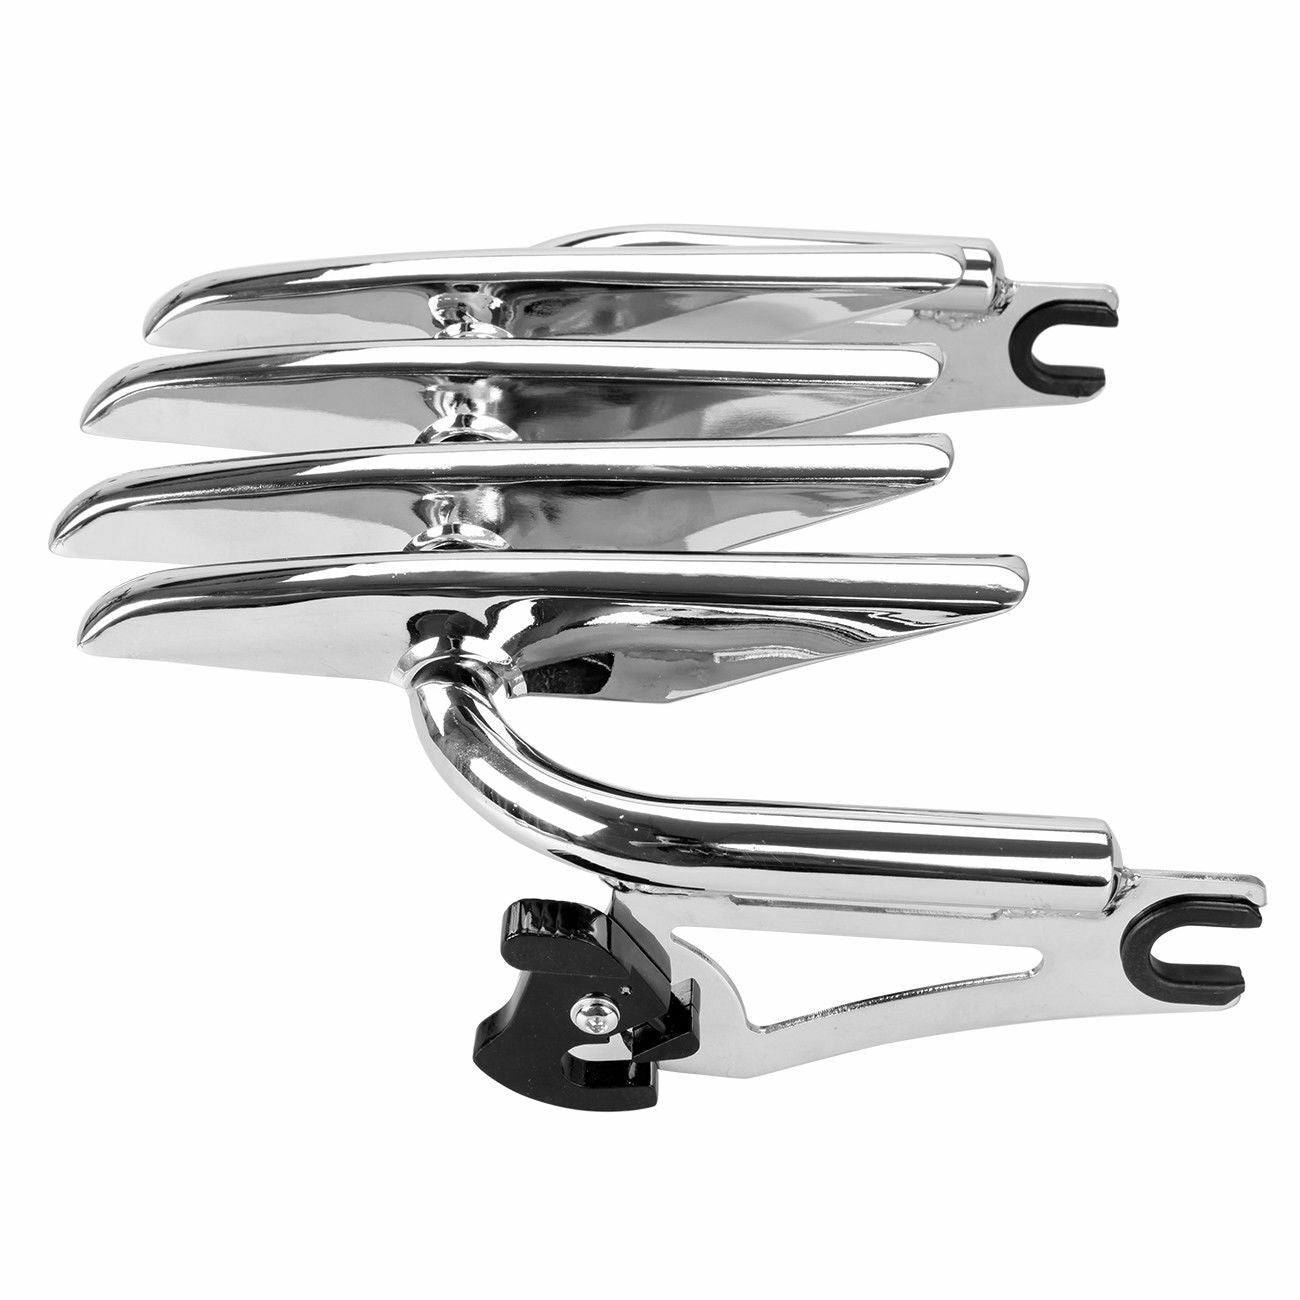 For 09-21 Harley Touring Chrome Detachable Sissy Bar w/ Pad Stealth Luggage Rack - Moto Life Products